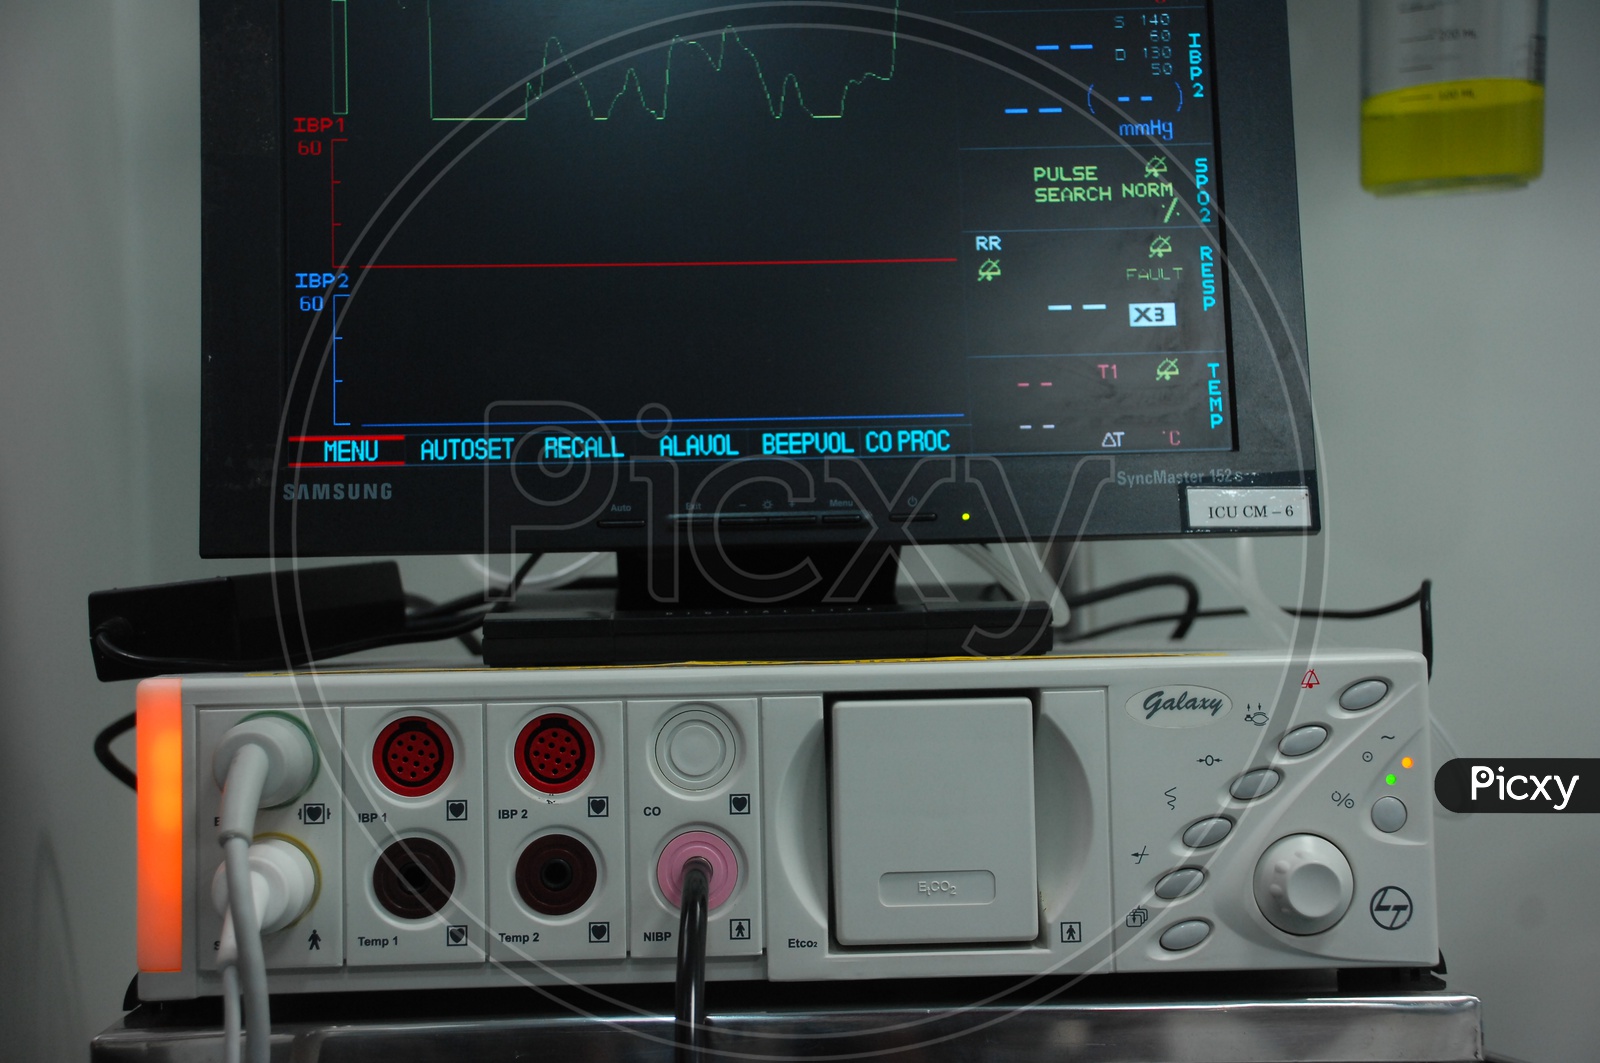 Heartbeat monitoring machine in a hospital